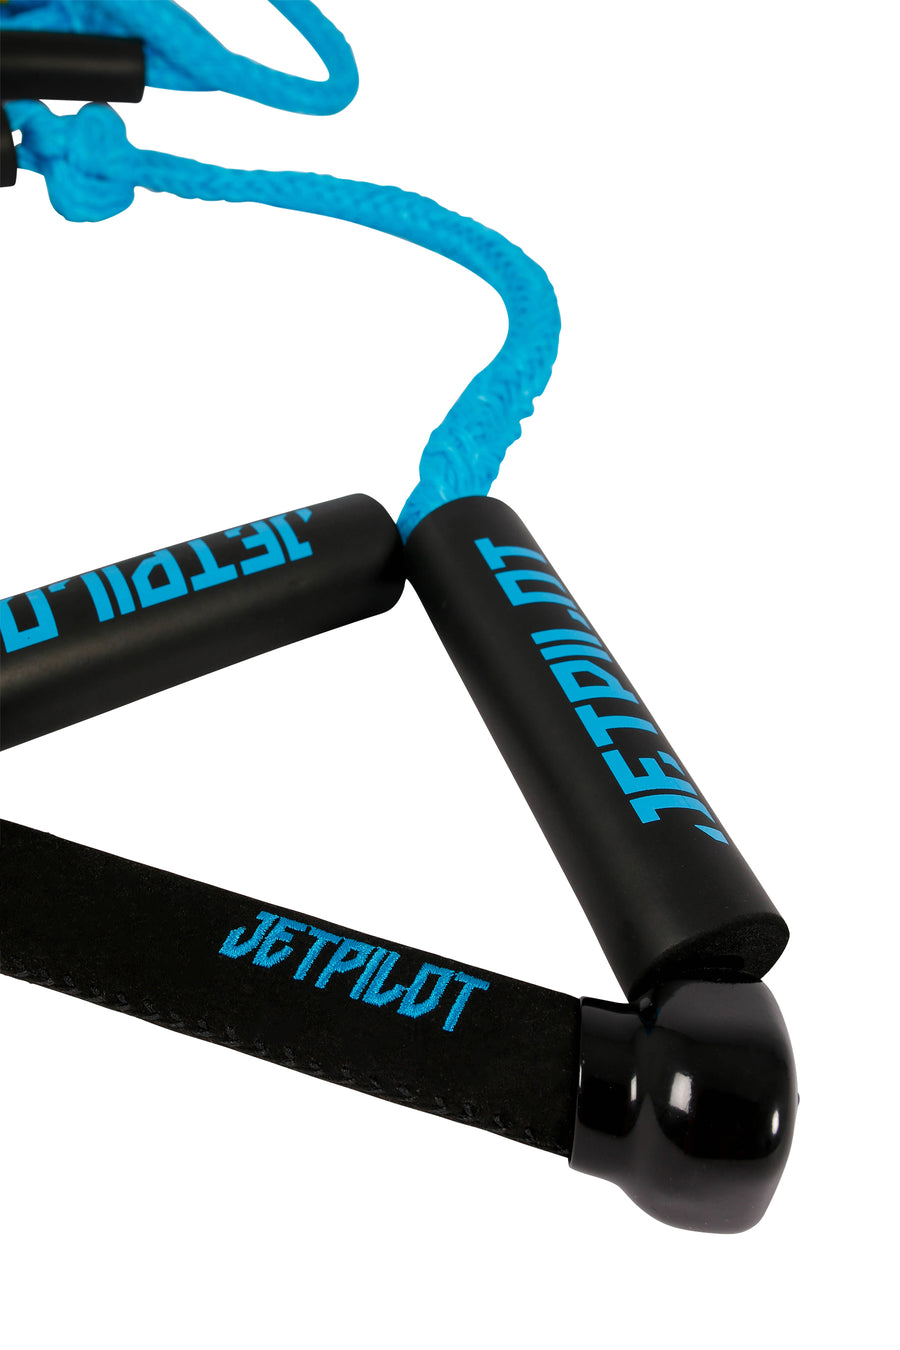 JP Wake Surf Tow Rope - Blue